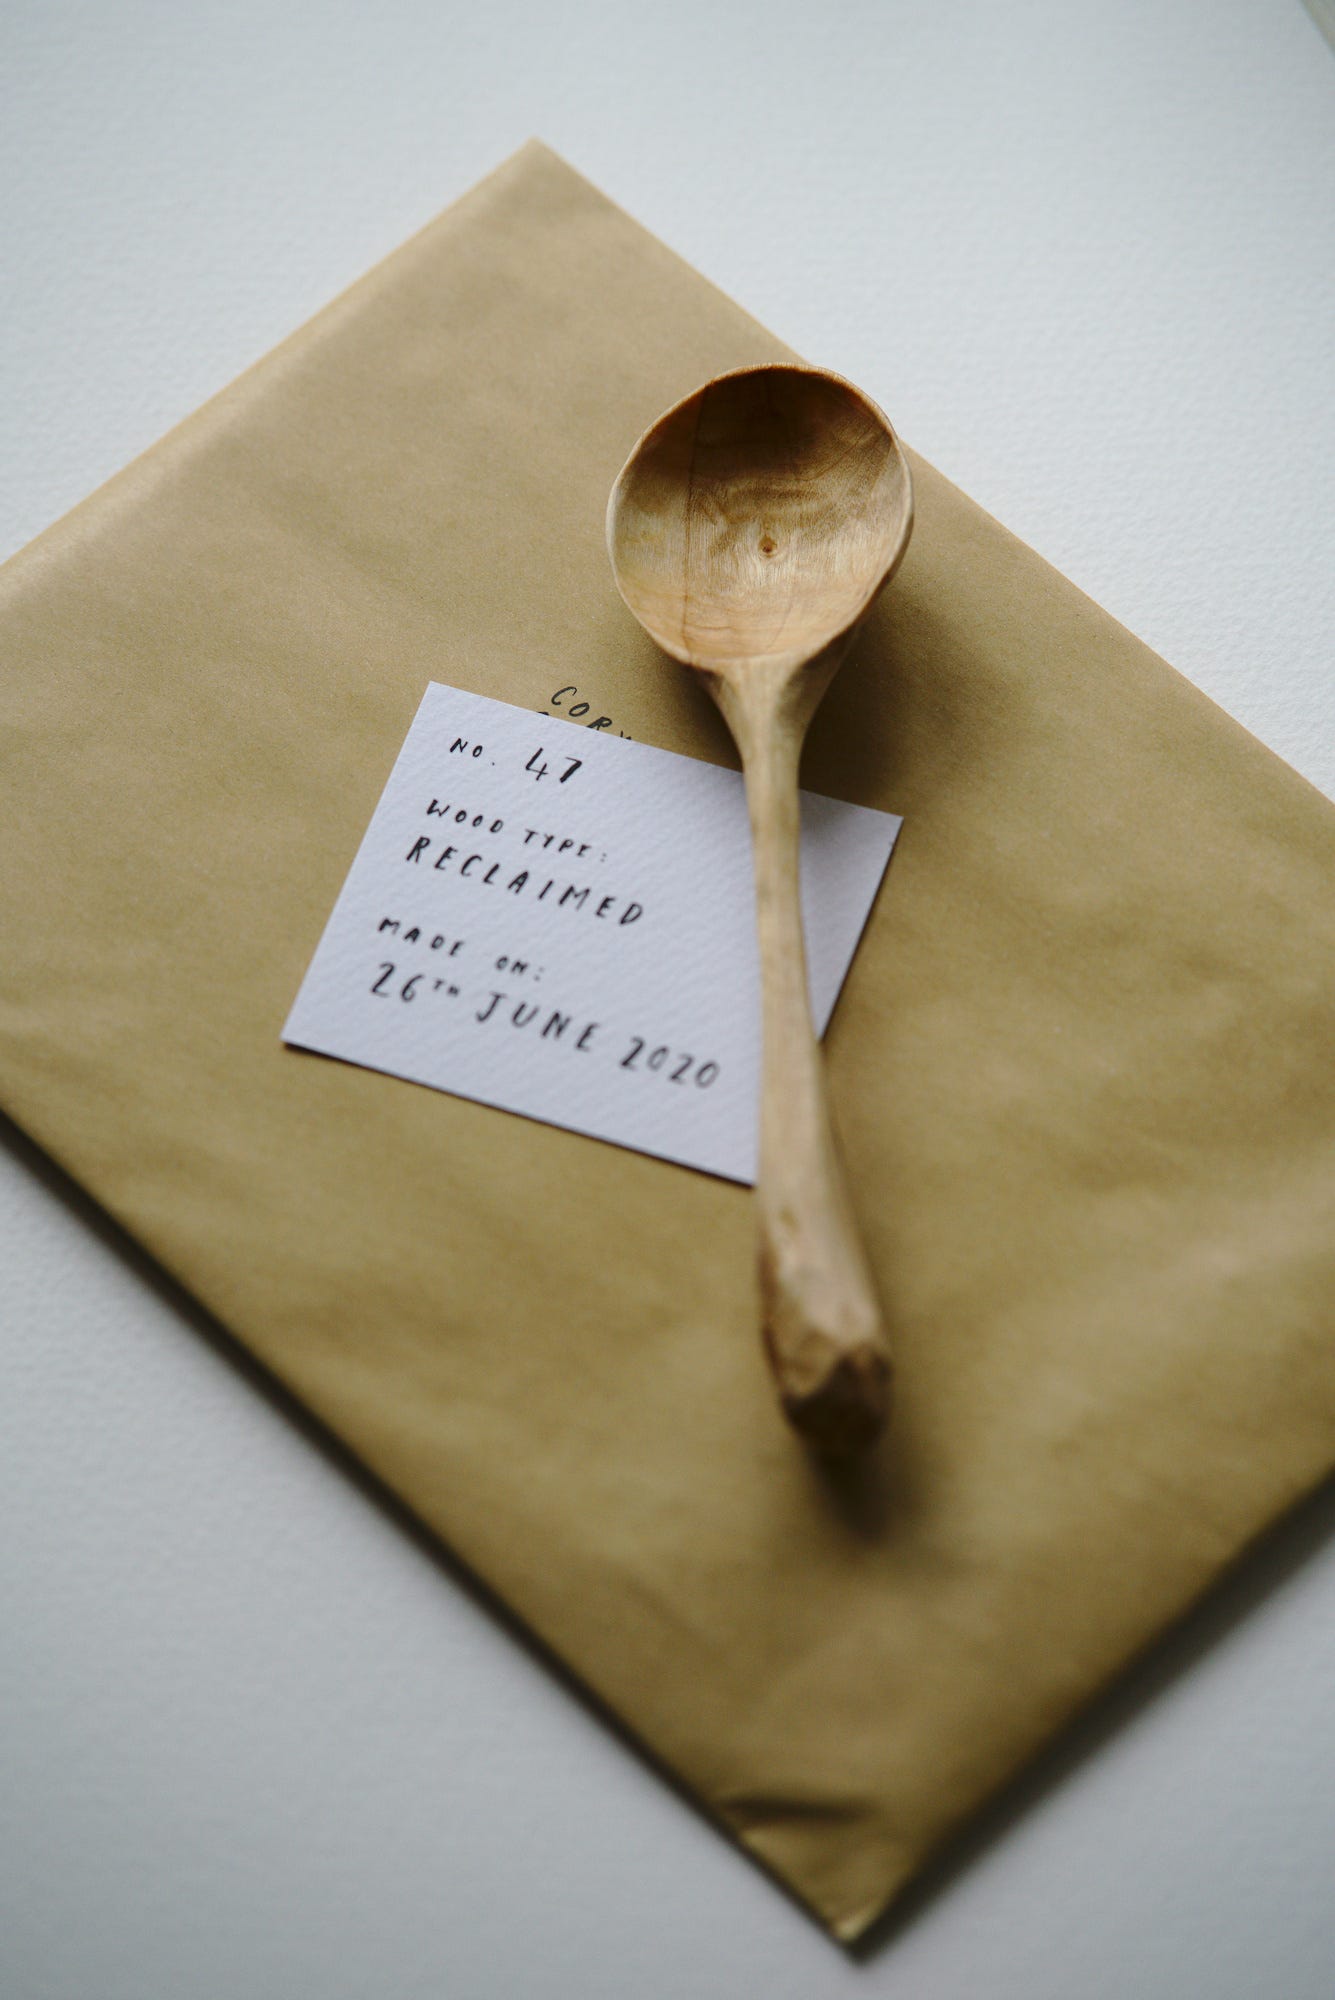 A hand written card sitting next to the spoon that was our first official online order, telling about the wood type, when it was made, etc.